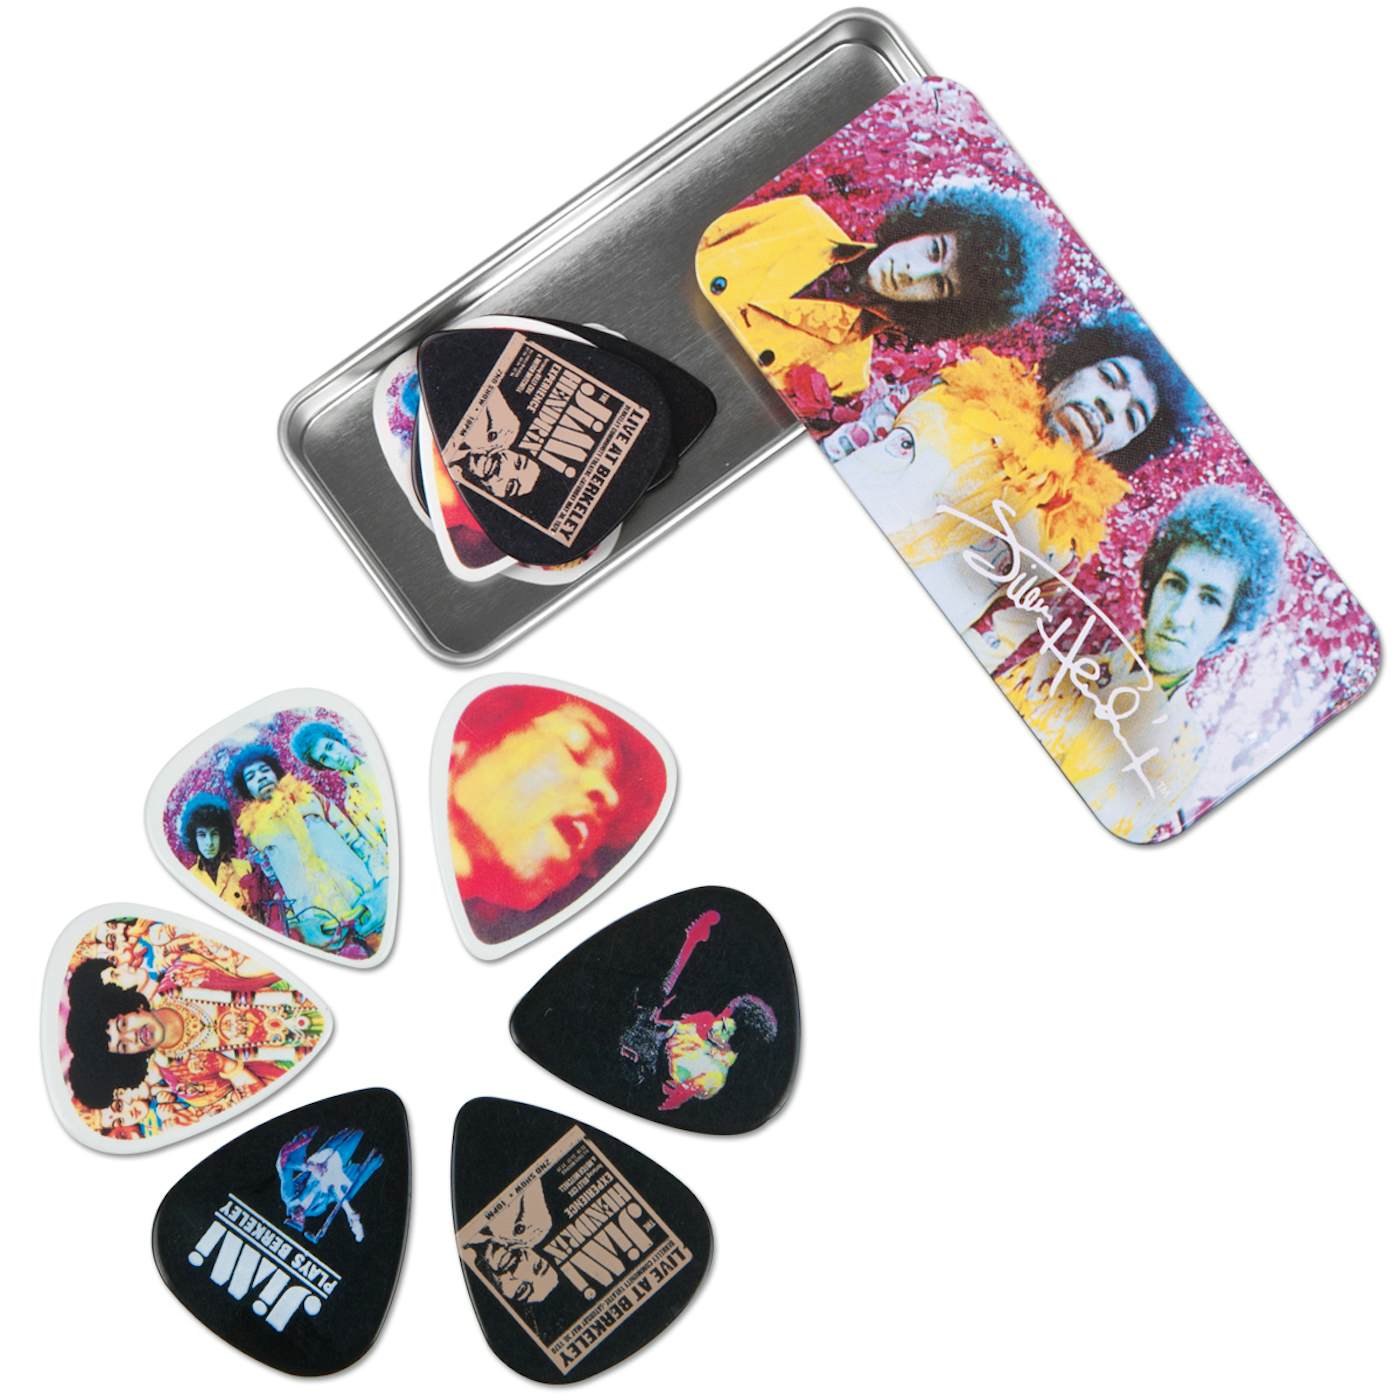 Jimi Hendrix Collector Series Picks - Are You Experienced